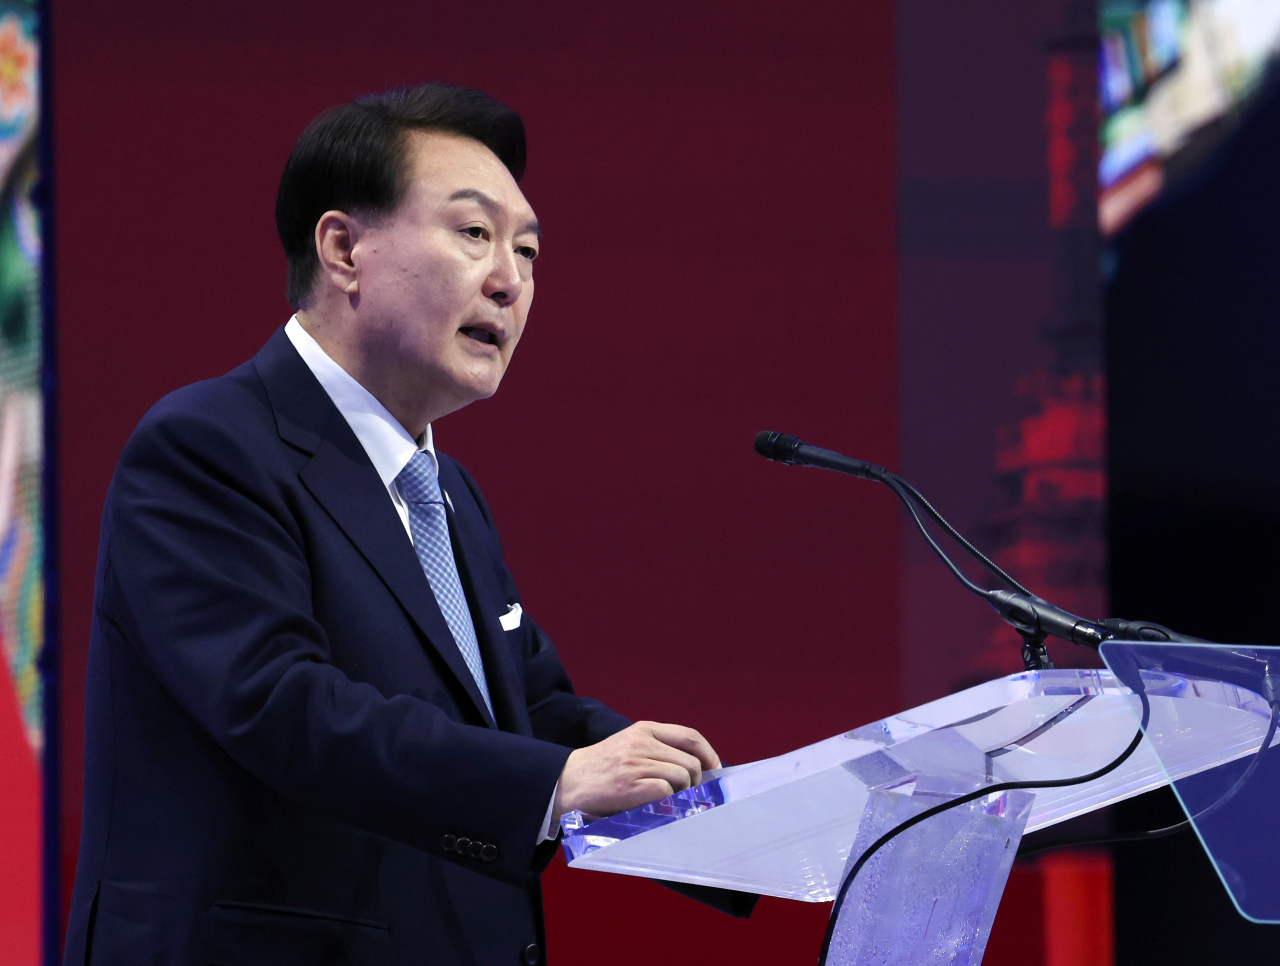 President Yoon Suk Yeol delivers a speech during the APEC CEO Summit in San Francisco on Wednesday local time. (Yonhap)